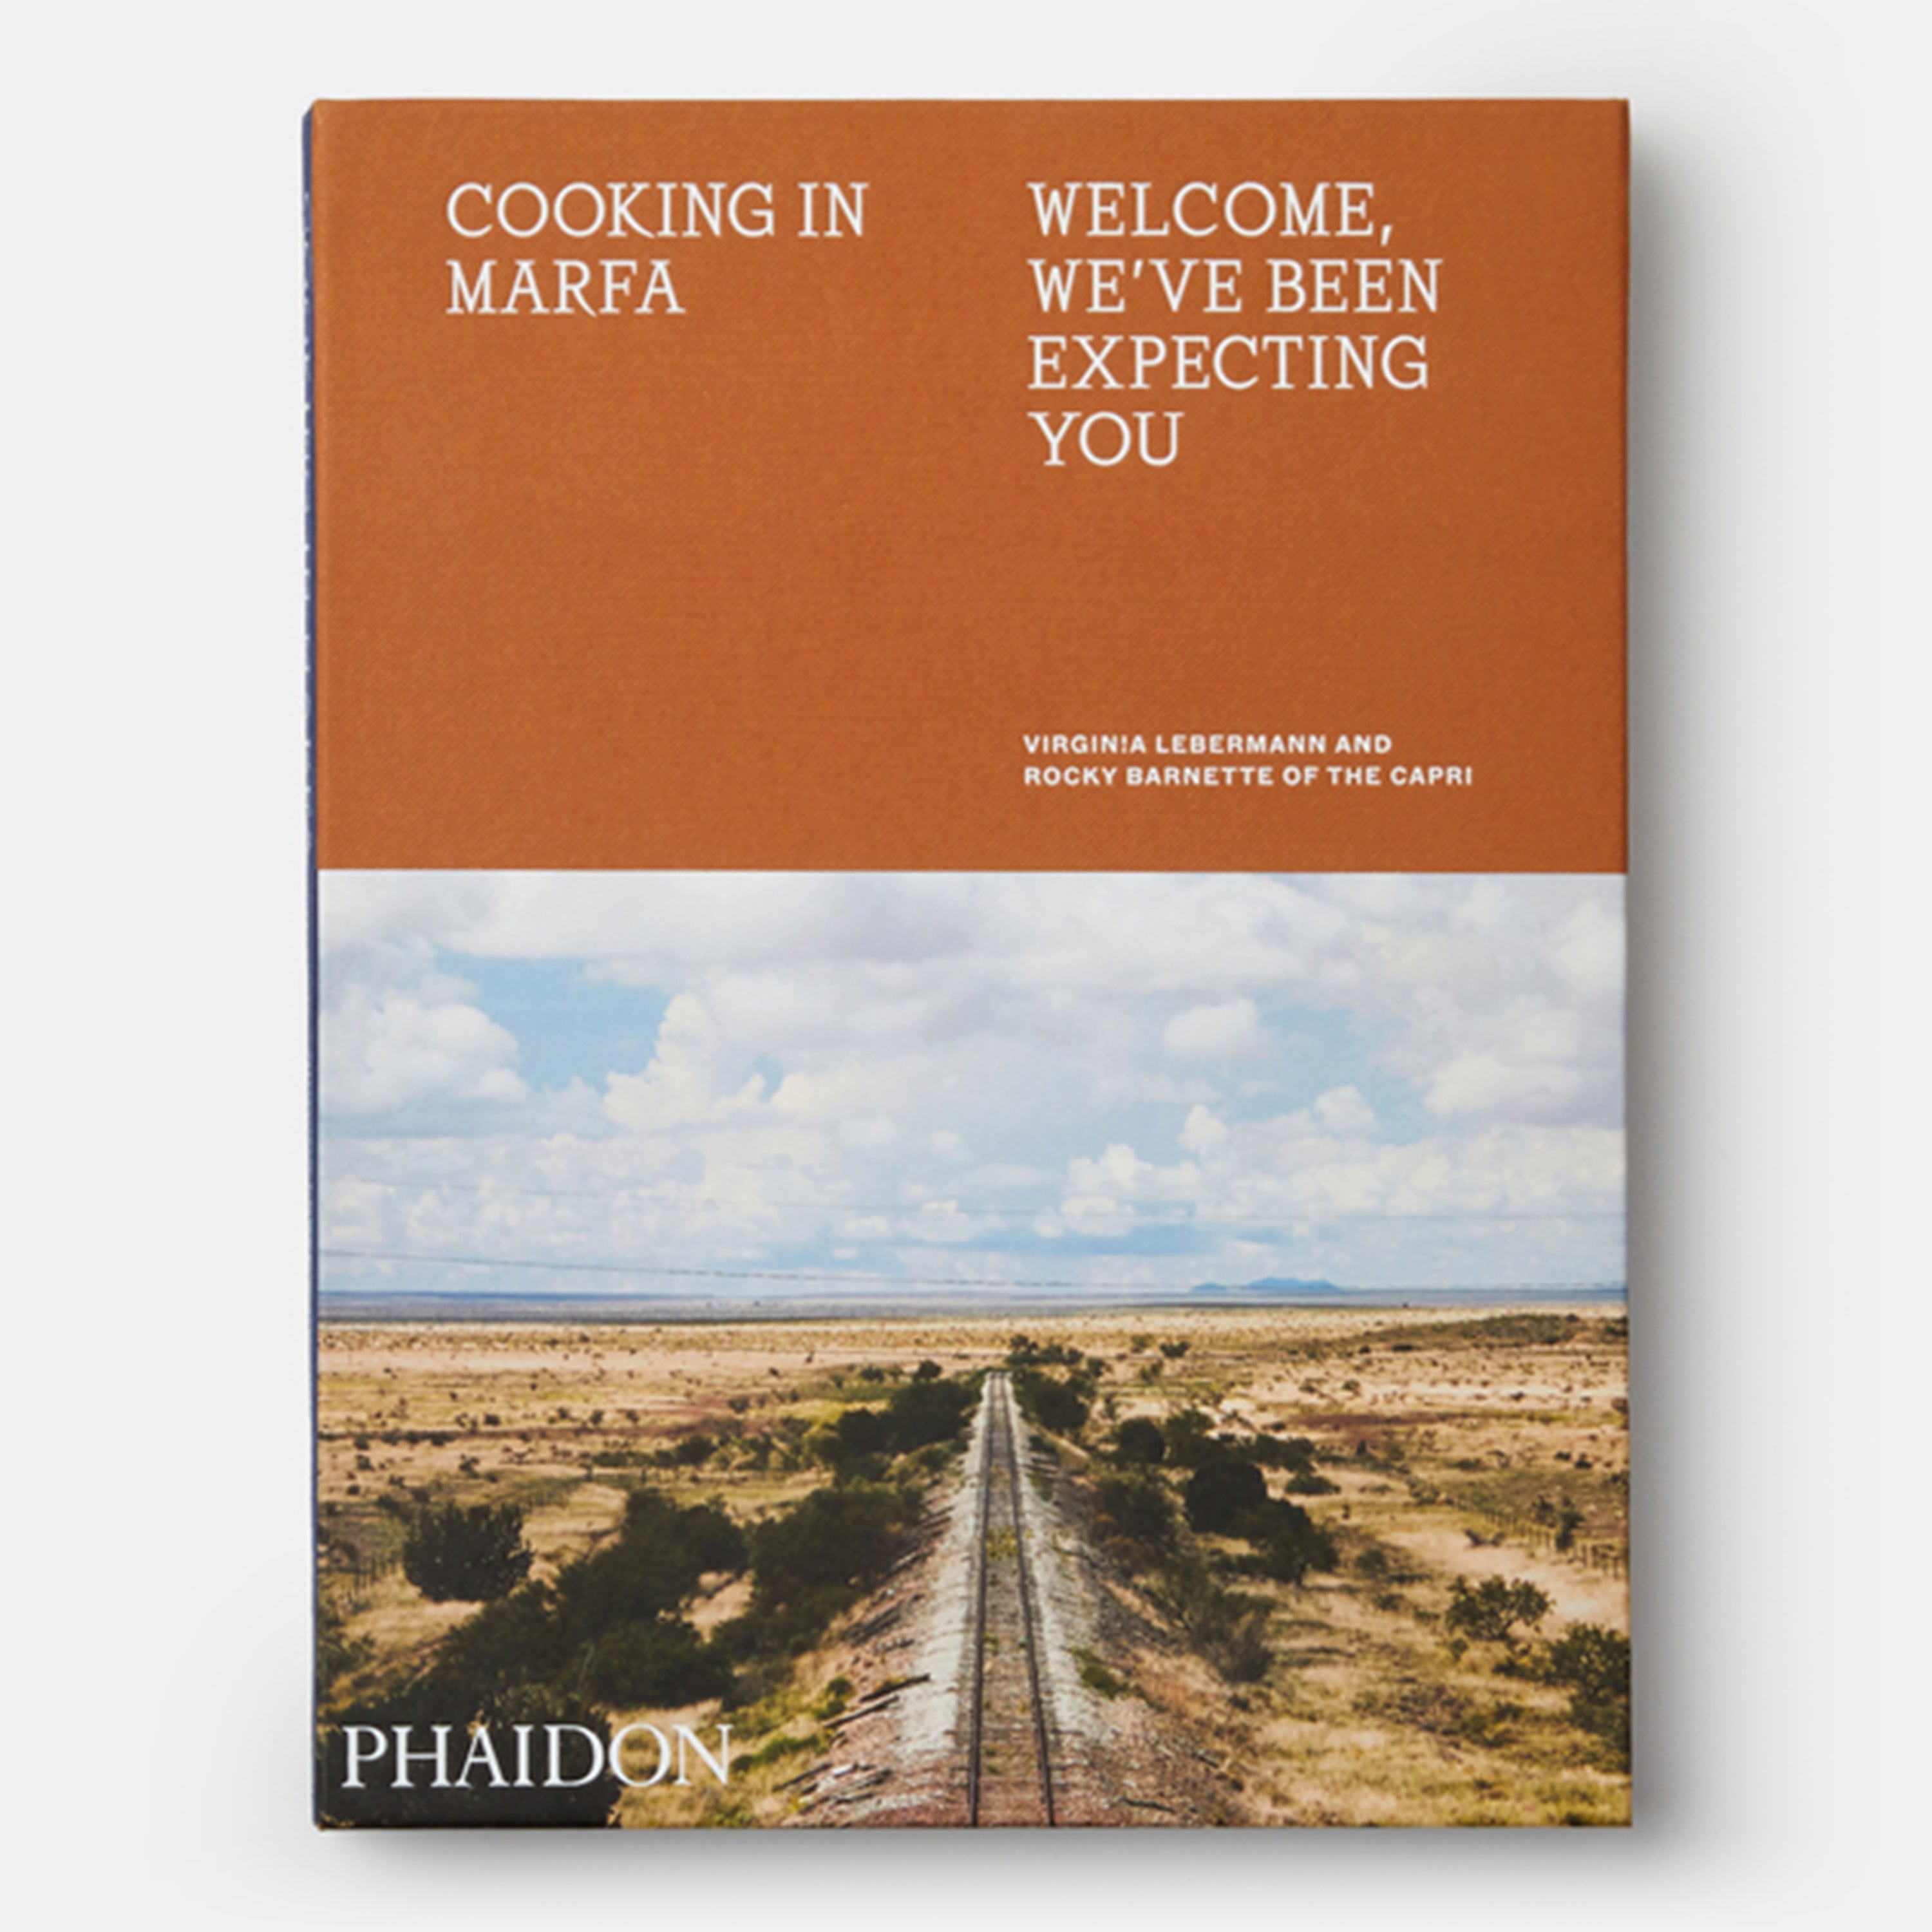 Cooking in Marfa